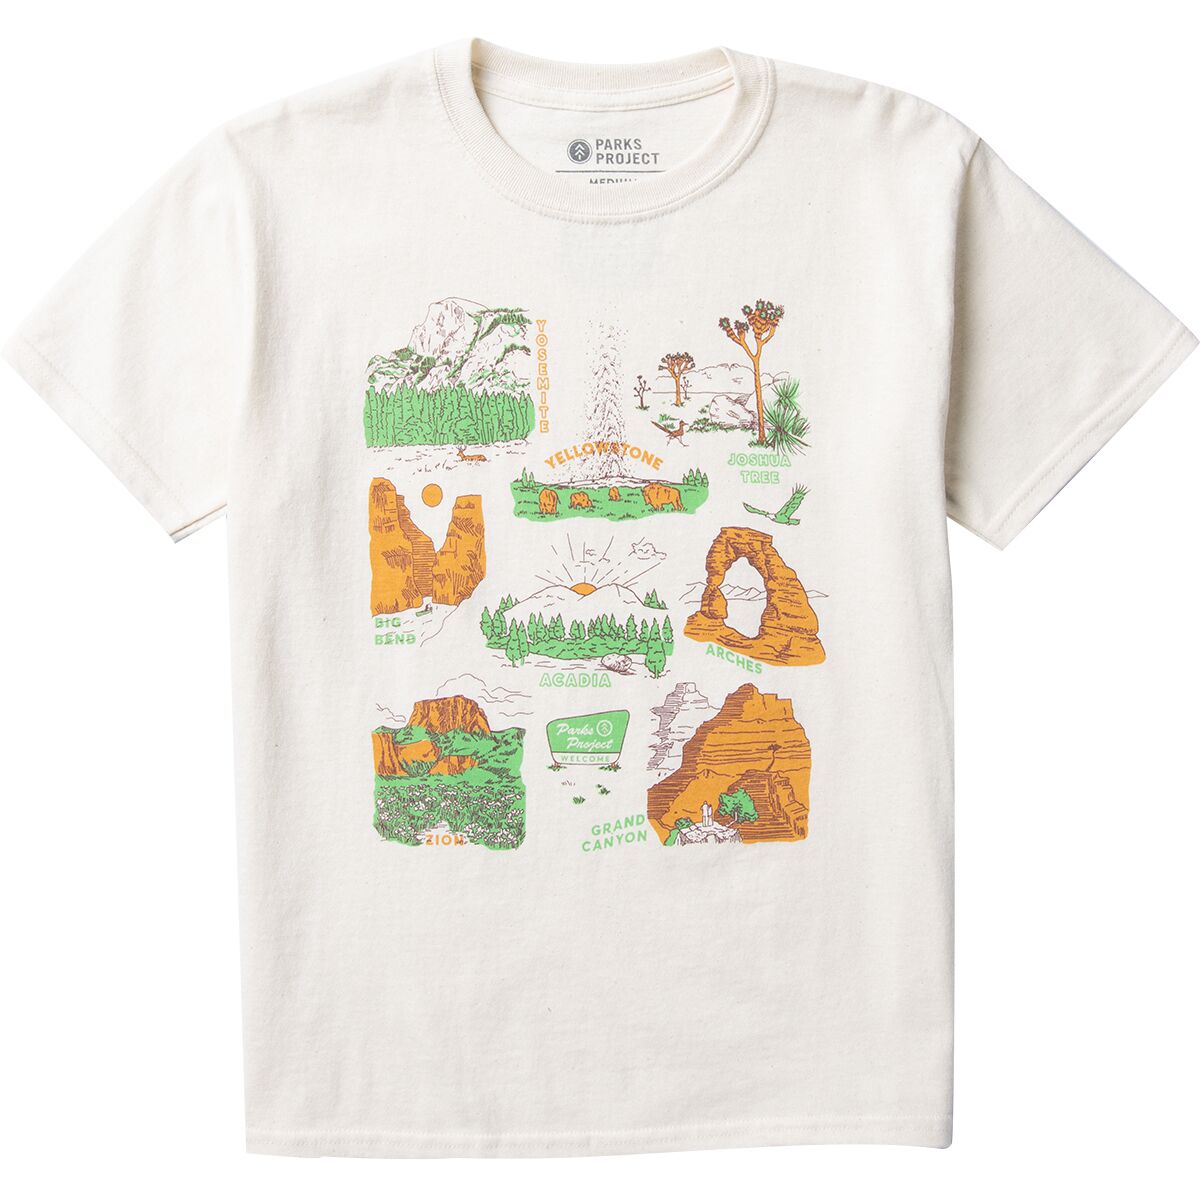 Parks Project National Park Welcome Short-Sleeve T-Shirt - Kids'